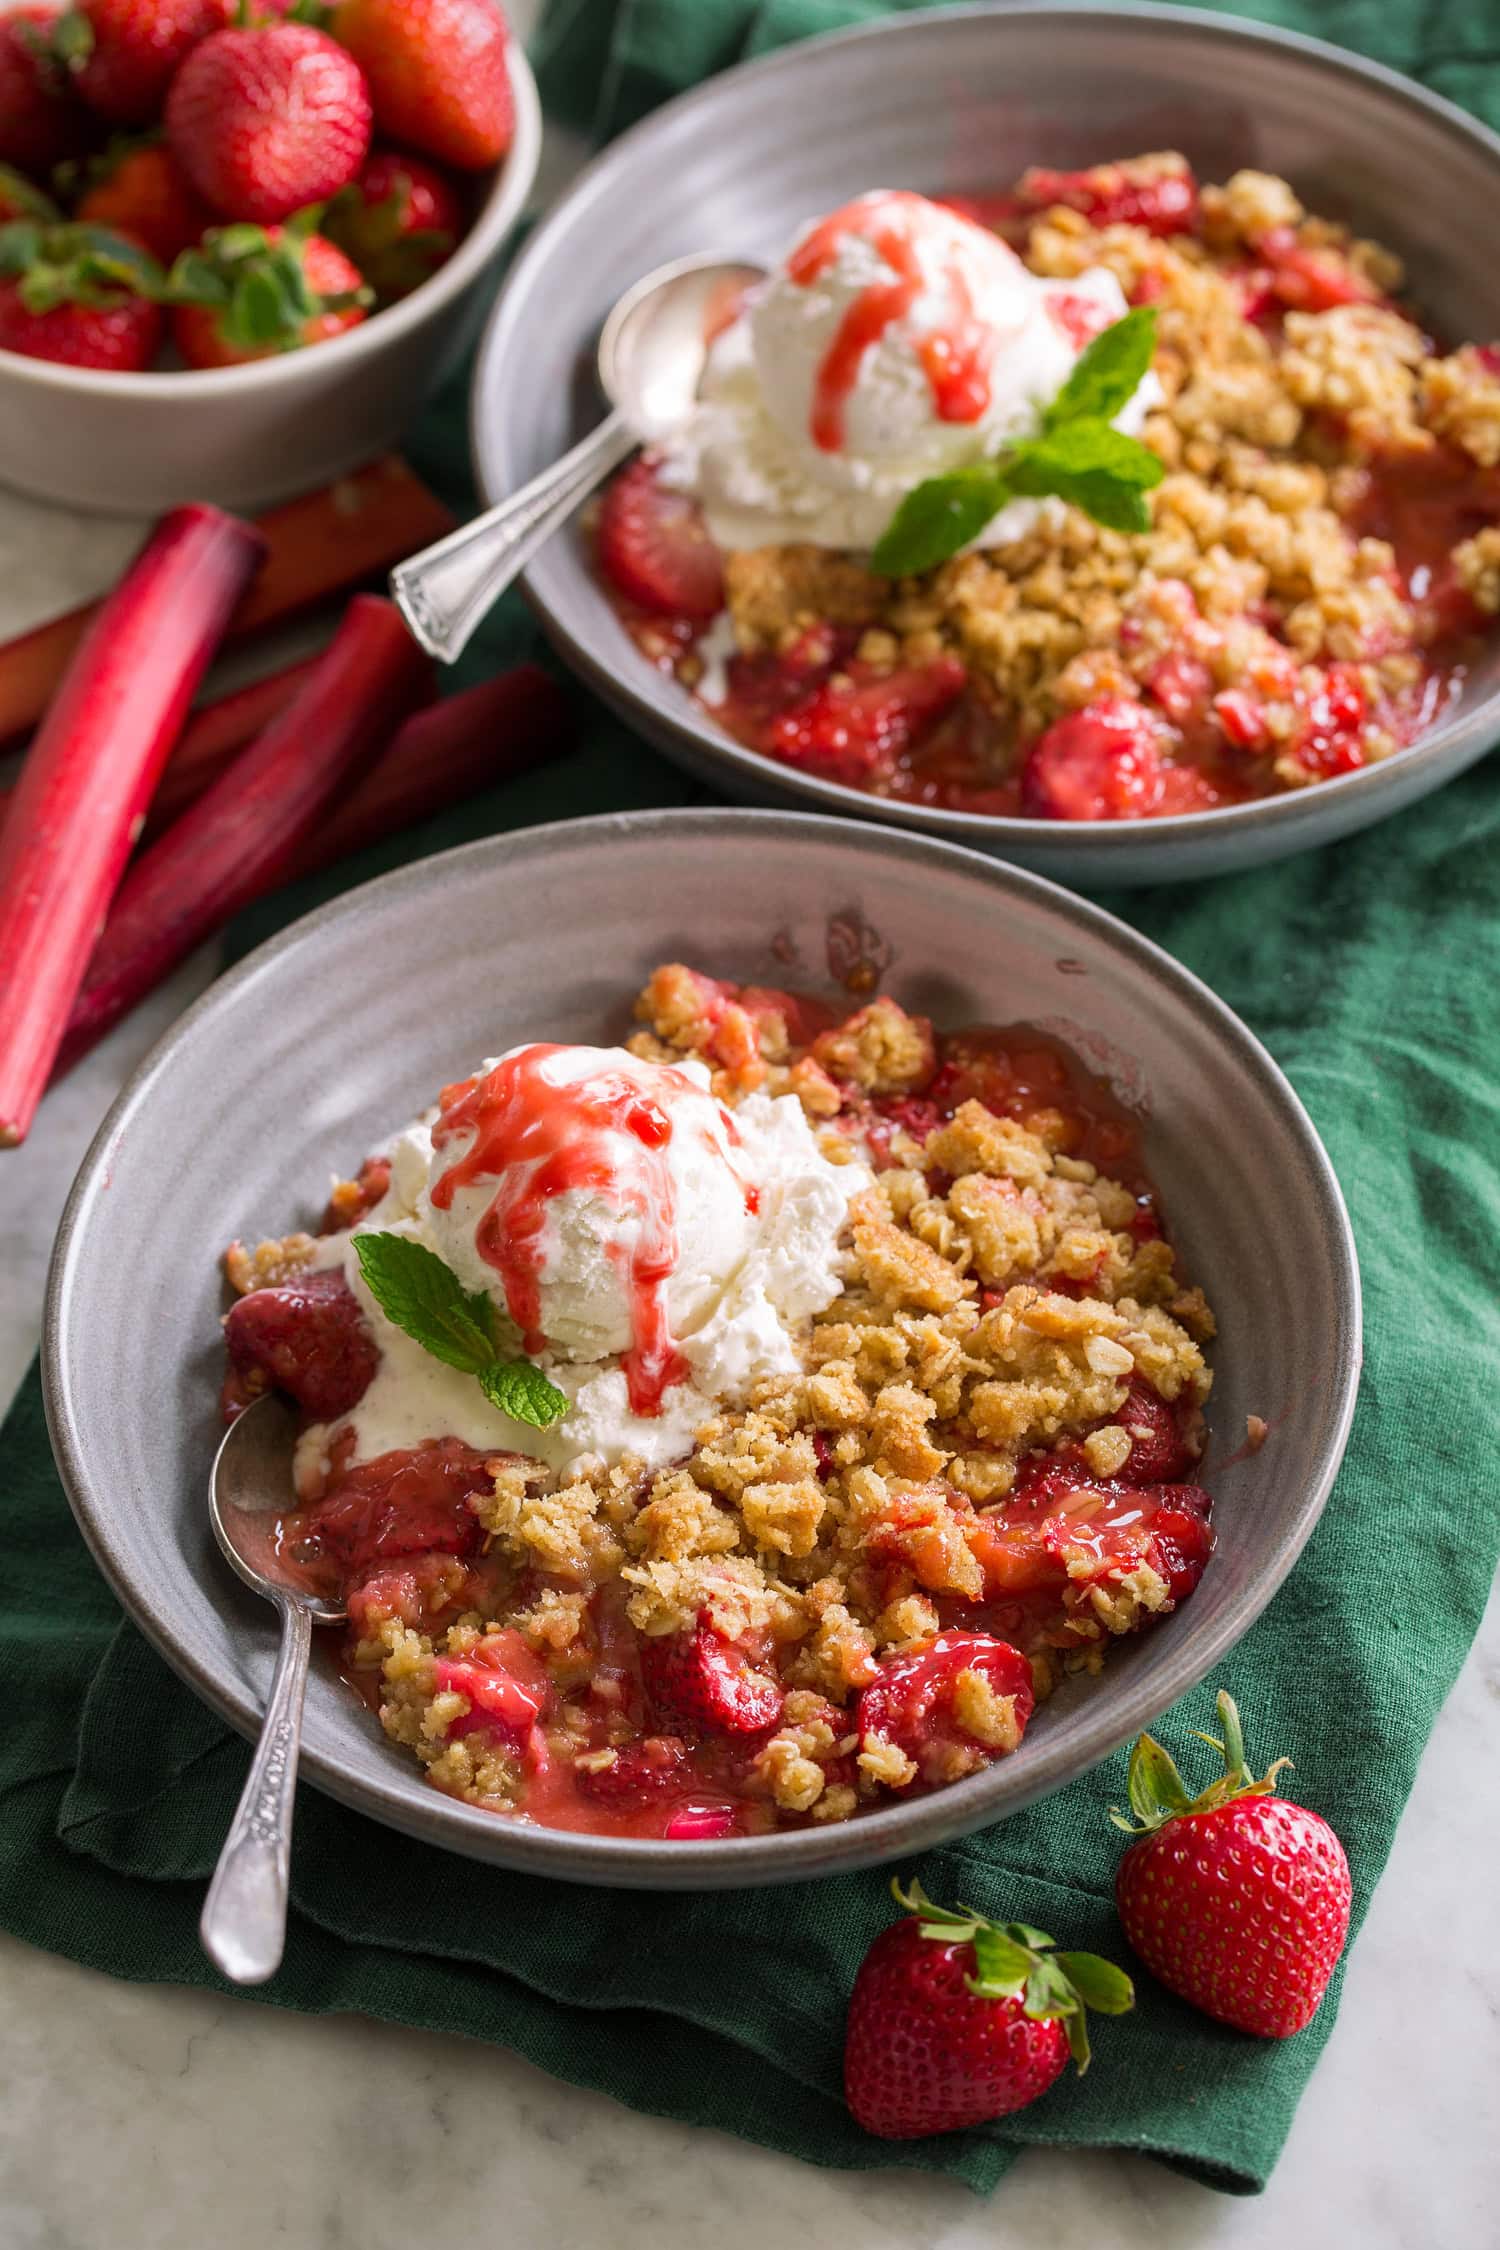 Two servings of strawberry rhubarb crisp with ice cream shown in grey bowls over green cloths.